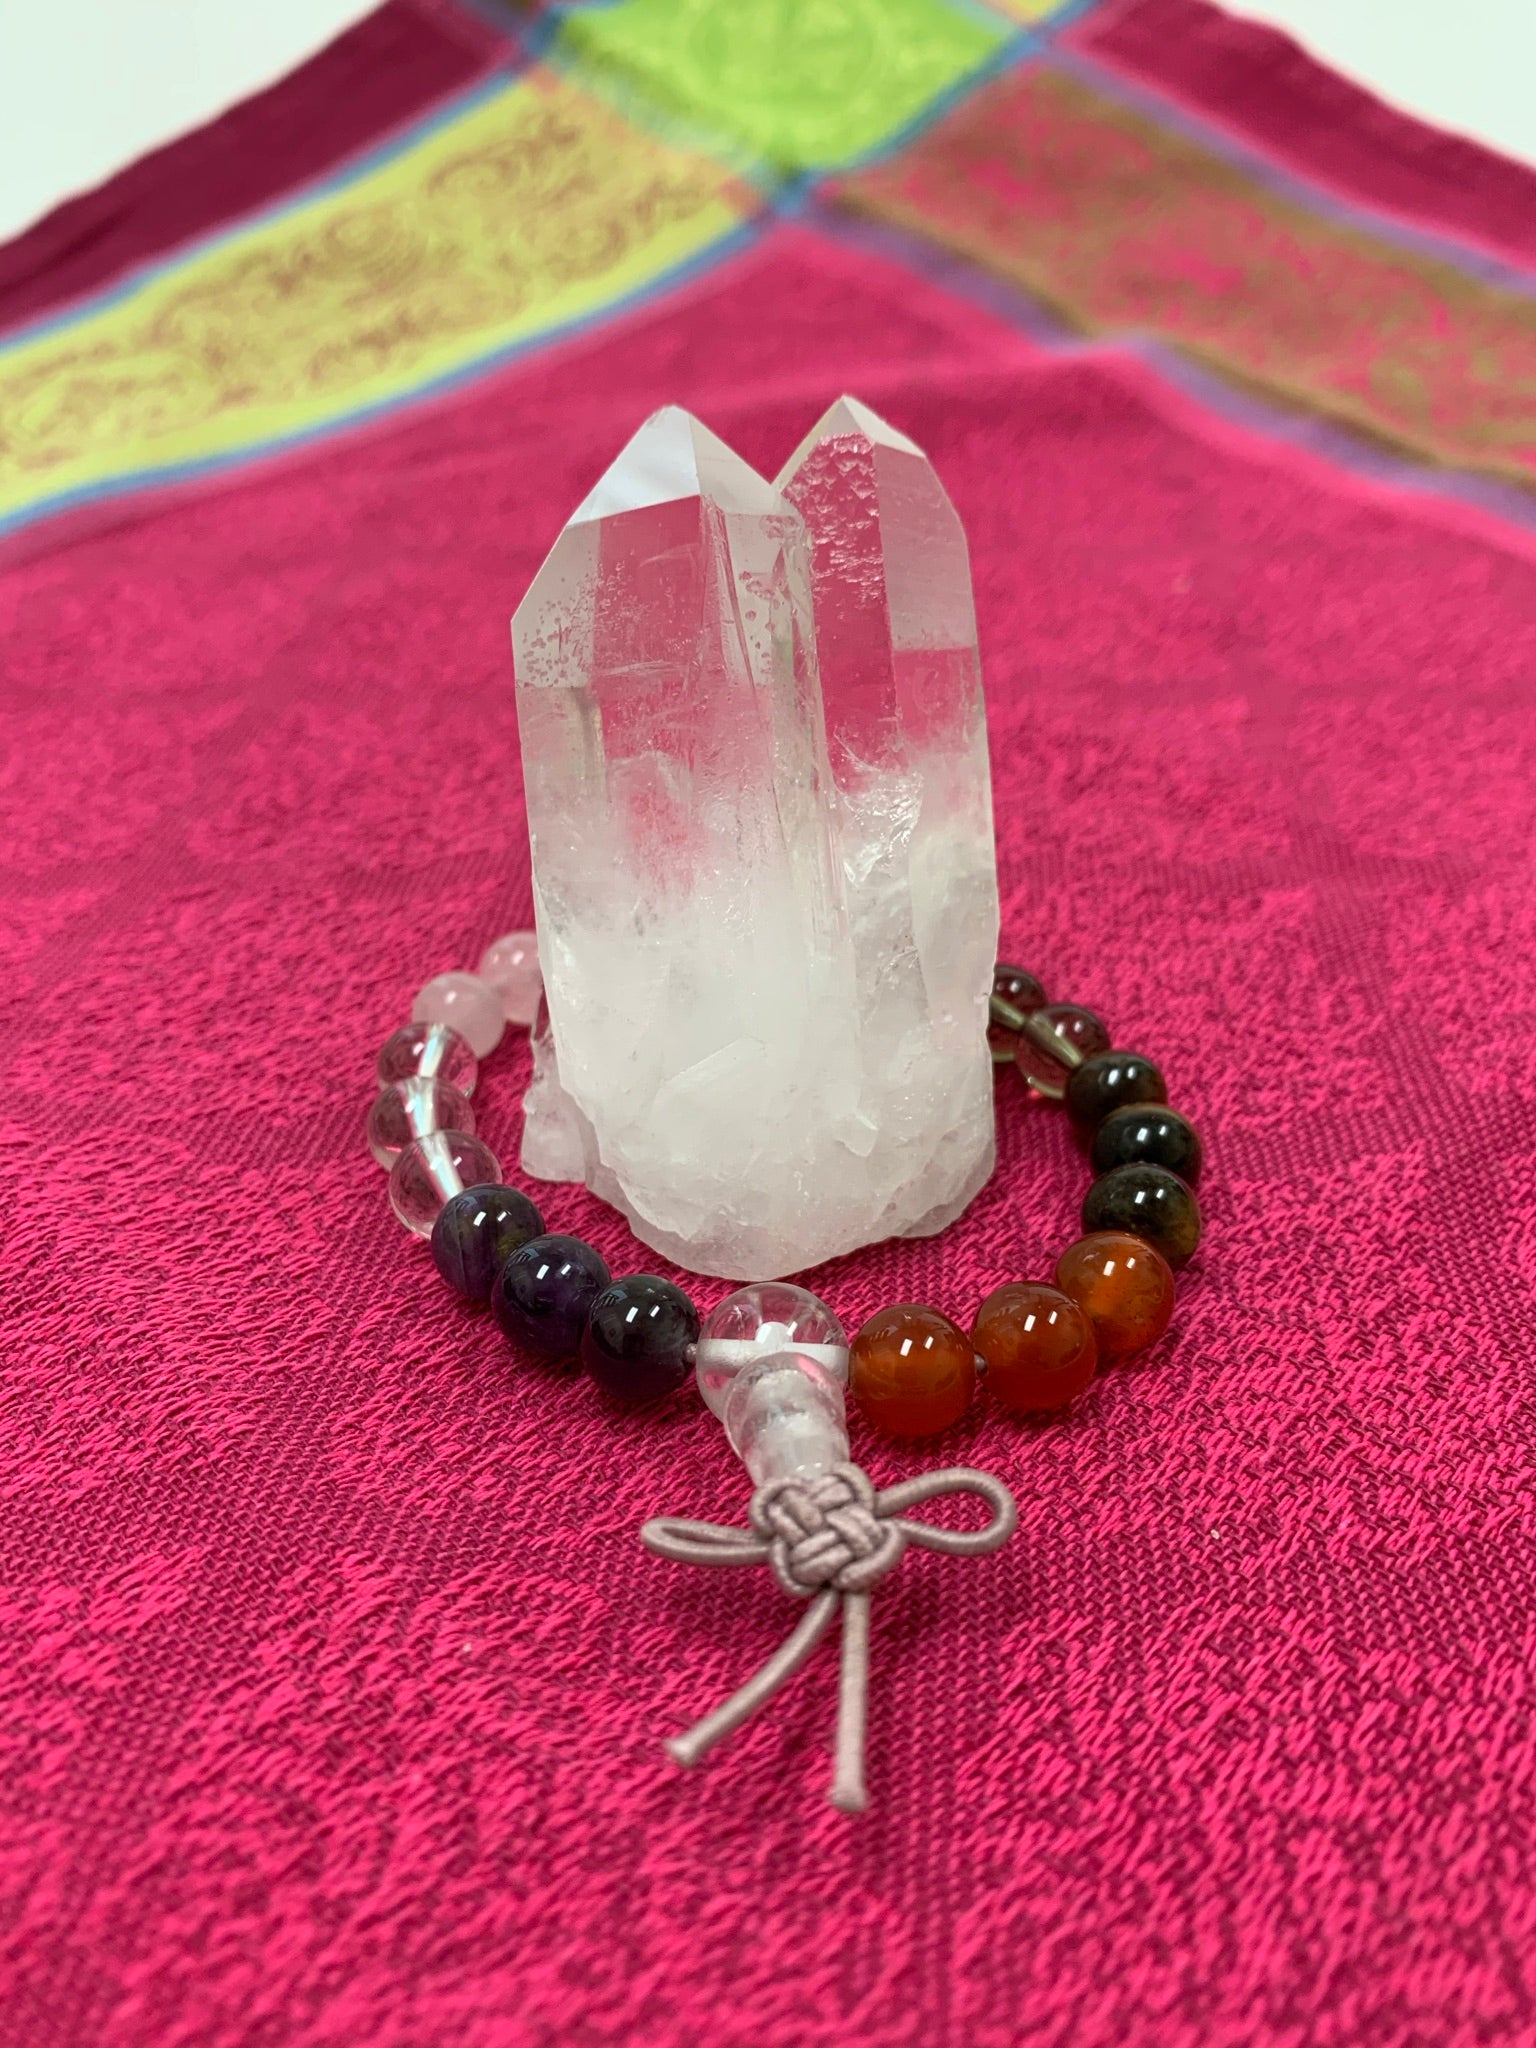 Mixed gemstone power bracelet with 7 different gemstones: amethyst, clear quartz, rose quartz, smoky quartz, tiger eye, carnelian, and aventurine. The bracelet is accented by a Chinese tassel knot.